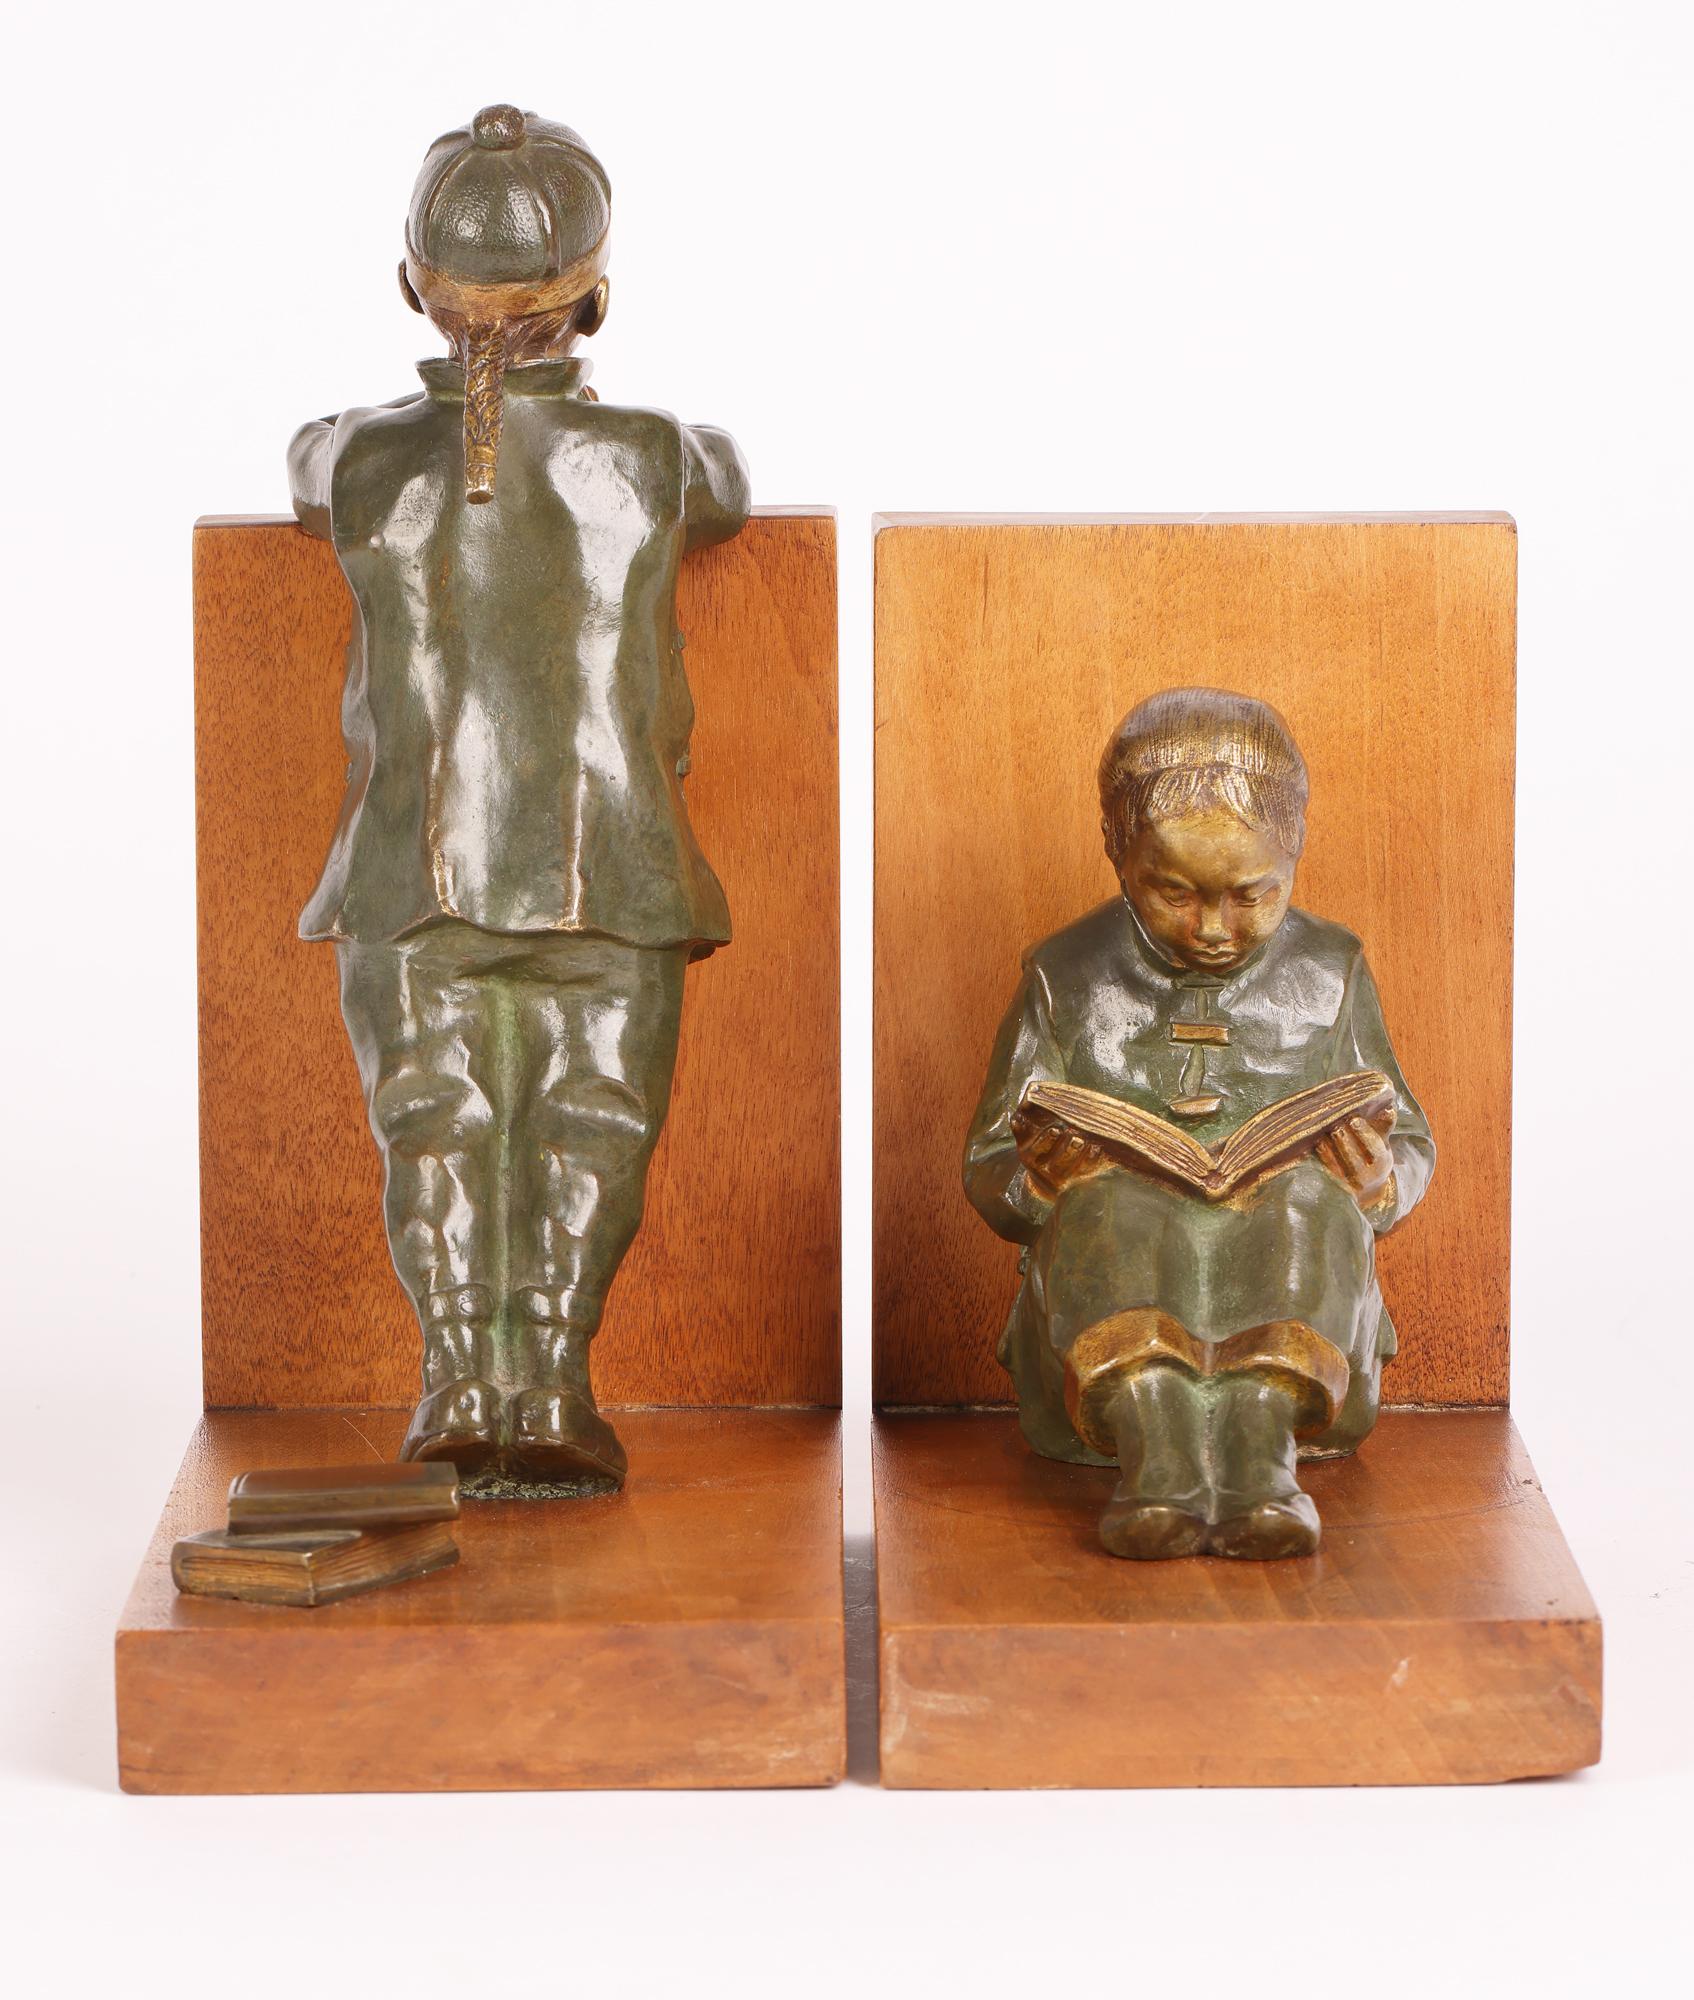 A stunning pair Art Deco cold painted bronze bookends mounted with Oriental Children figures by renowned sculptor Hester Mabel White (British, 1870-1948) and dating from around 1920. This iconic pair of bookends portrays two children in Oriental